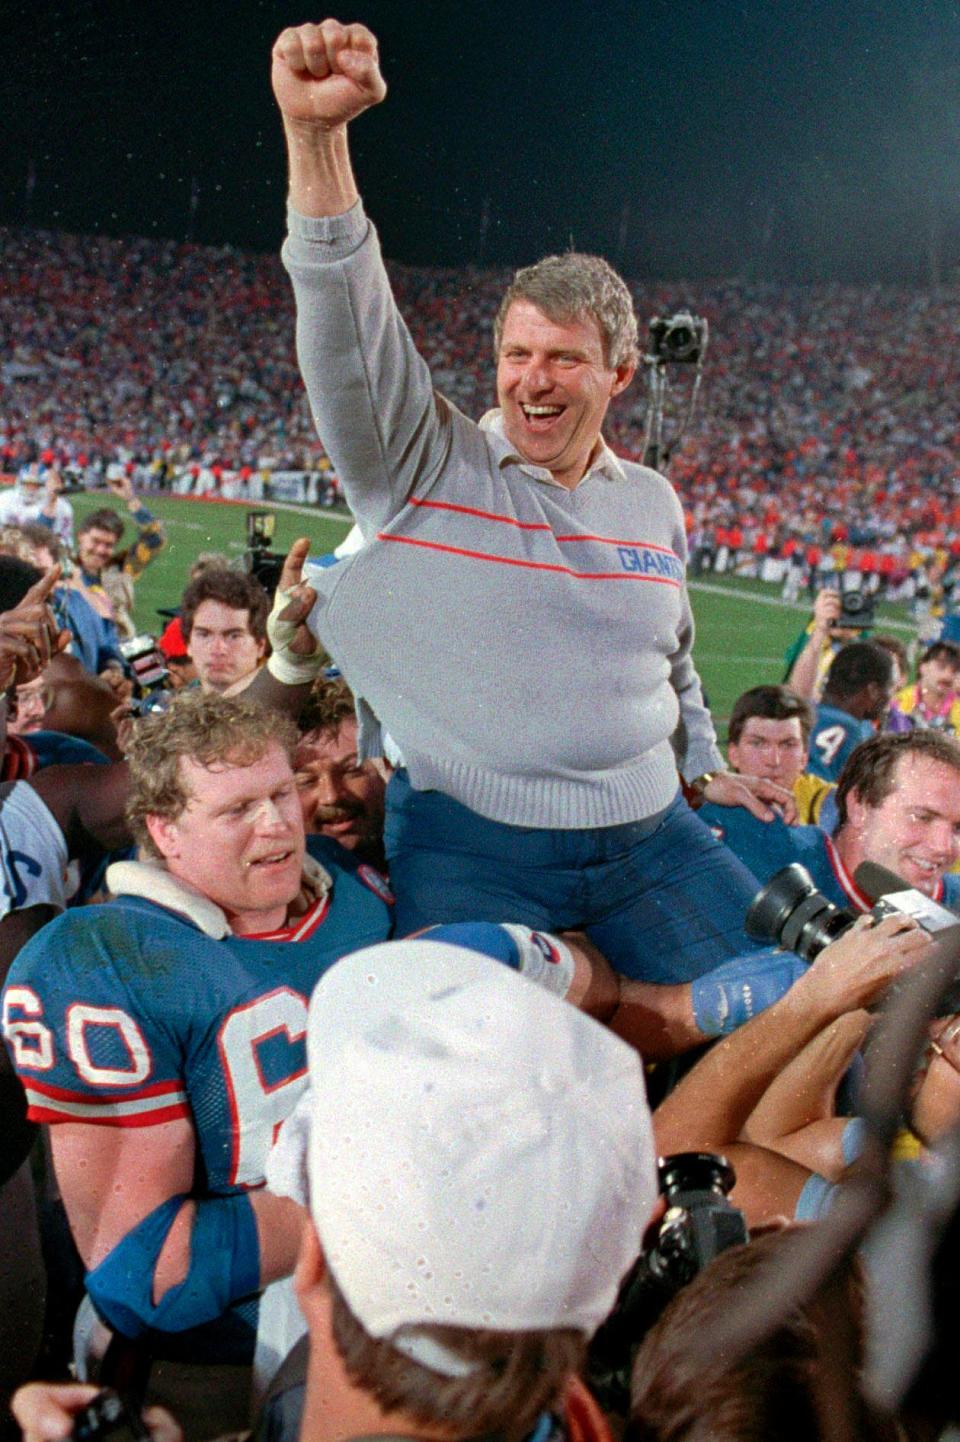 Bill Parcells won the first two Super Bowls in New York Giants history in 1986 (pictured) and 1990.